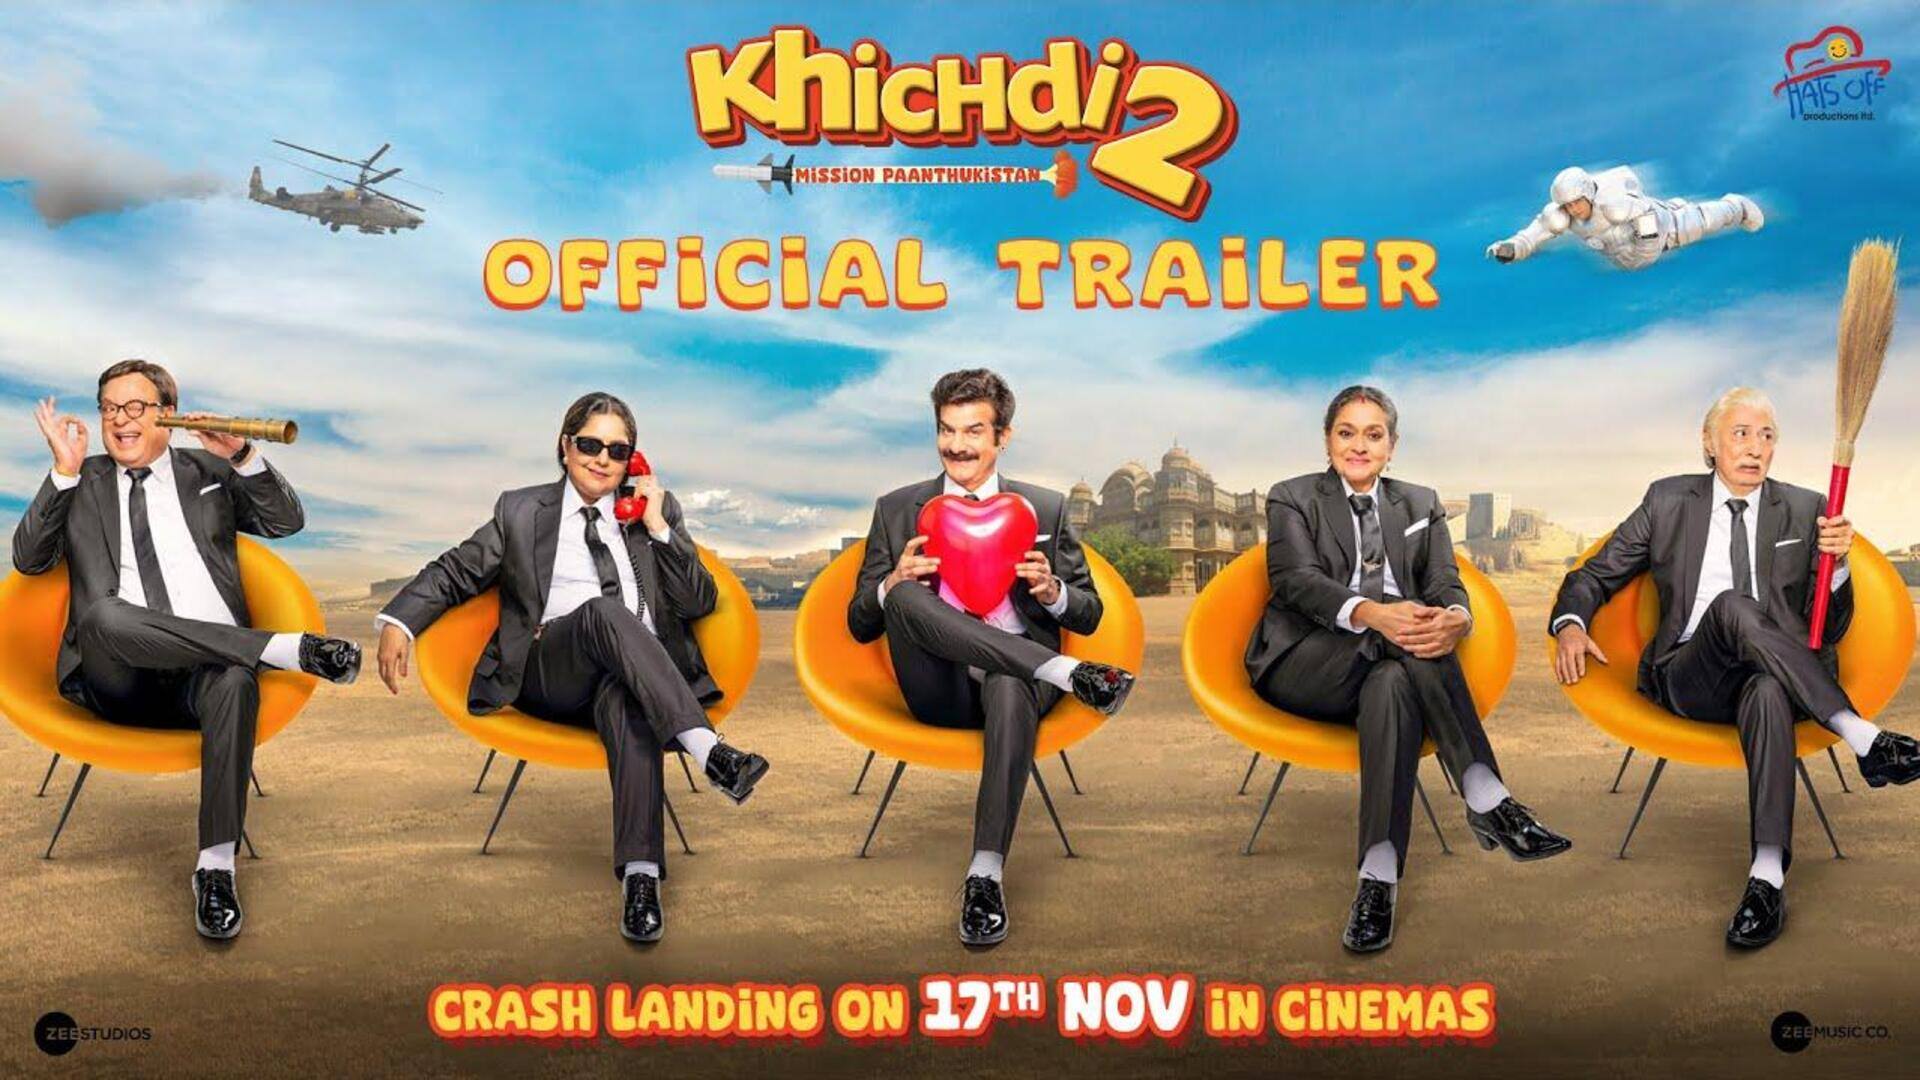 Box office collection: 'Khichdi 2' is still struggling for stability